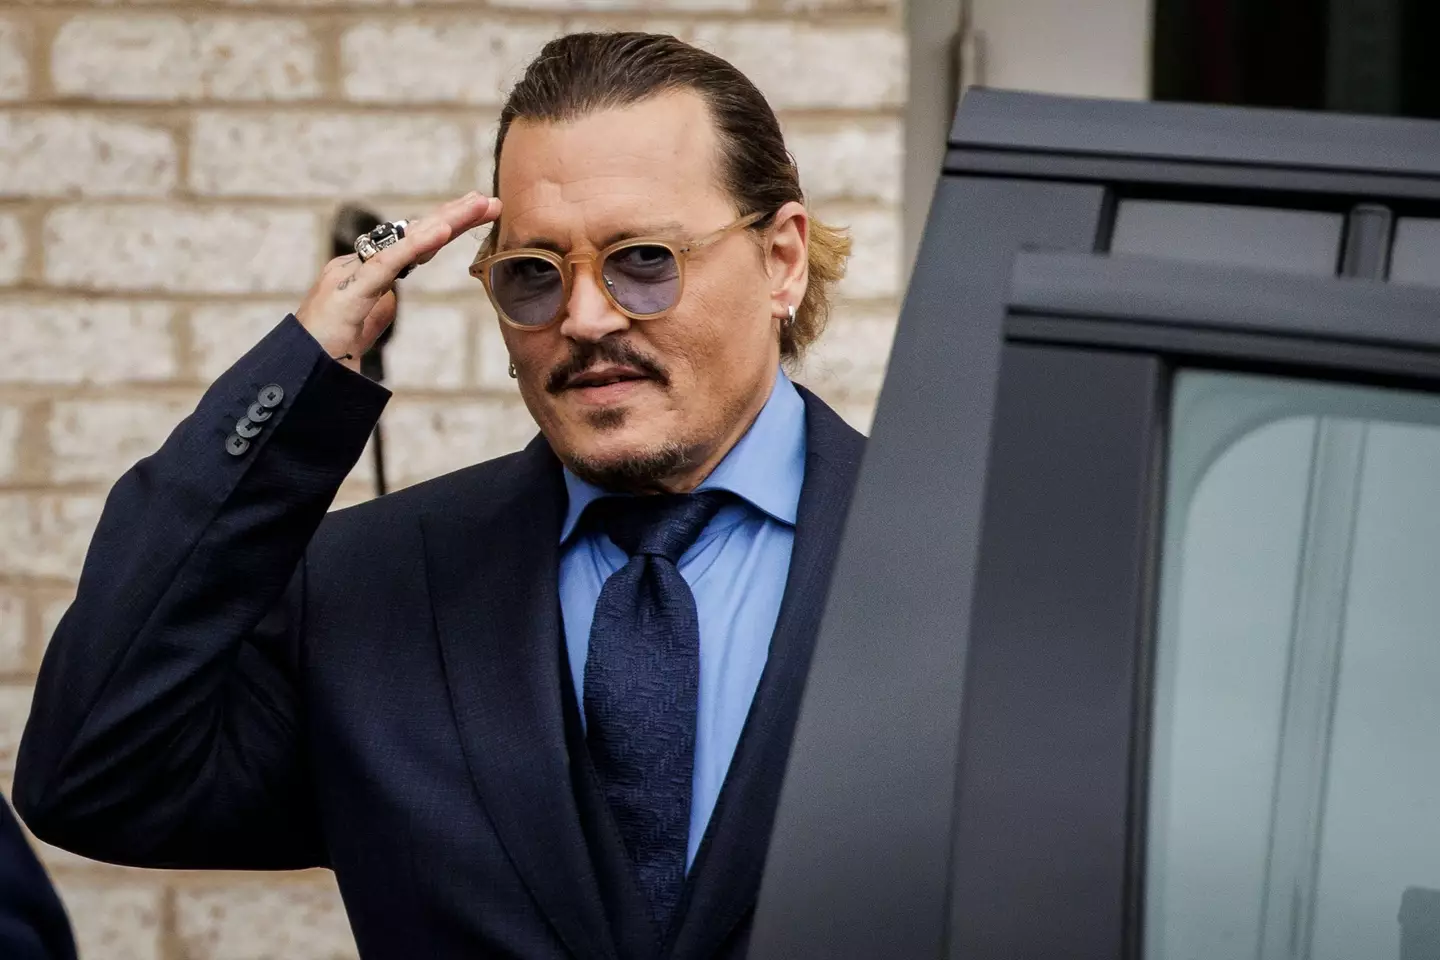 Depp could also decide to waive monetary damages.